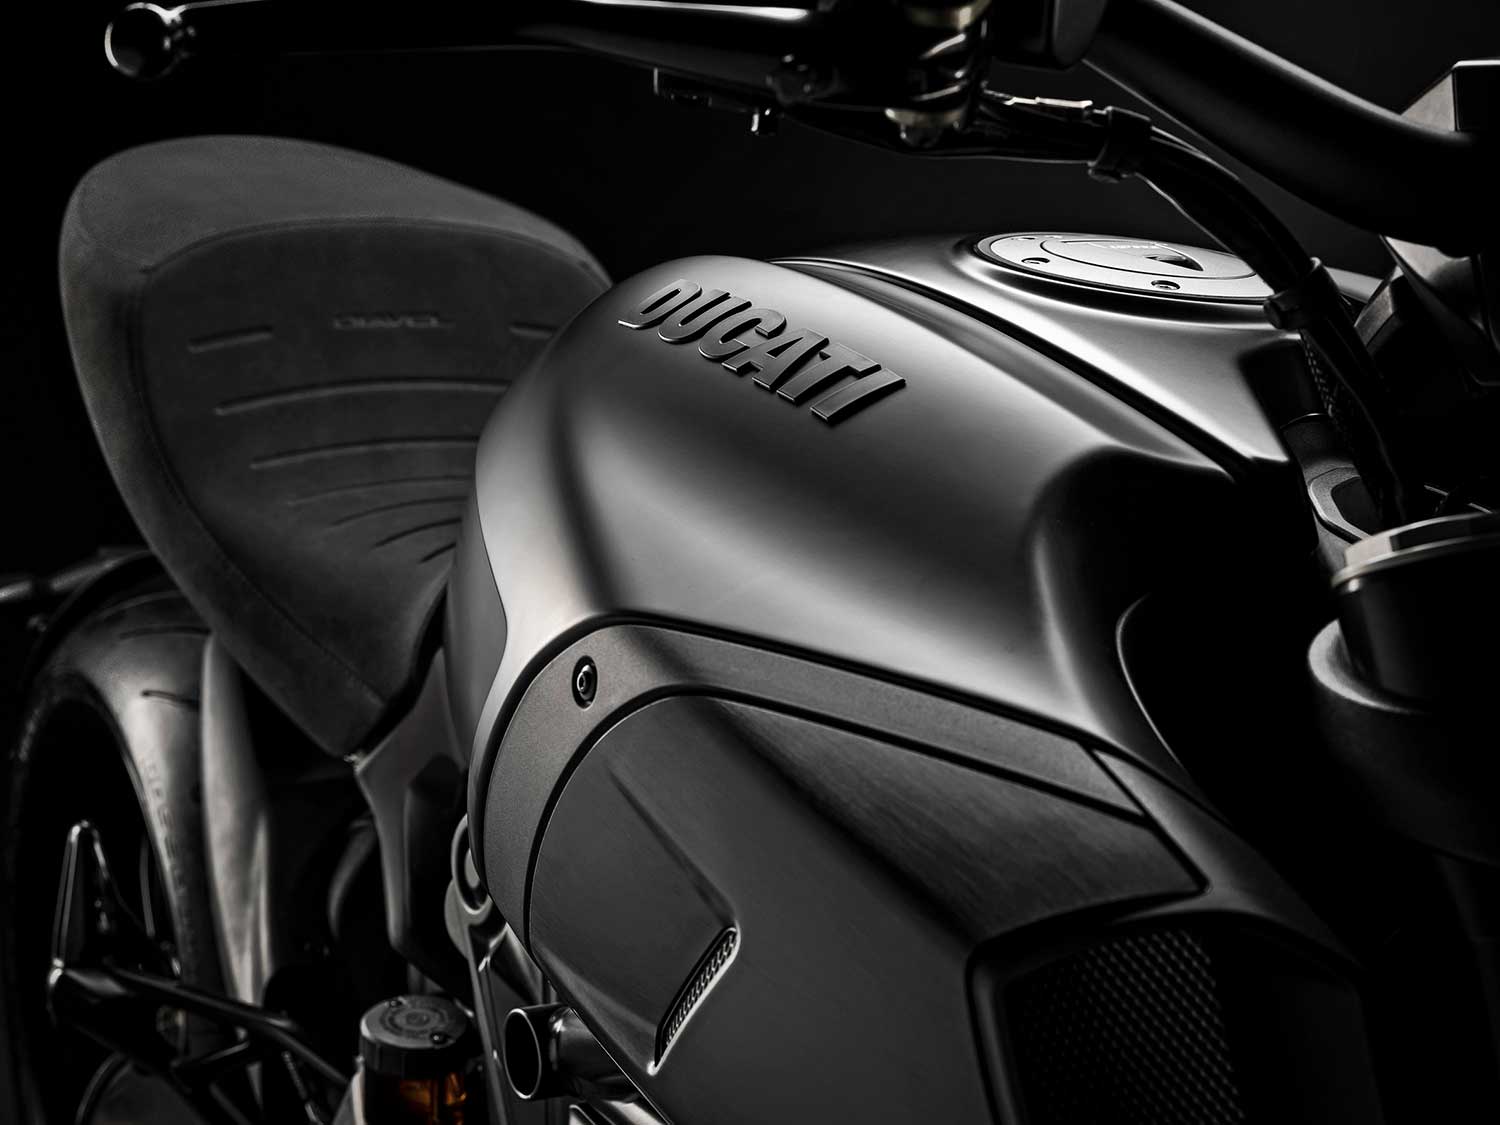 “Dark Stealth” essentially means matte black for the main frame, with other components sporting different black finishes on the standard 1260 model.